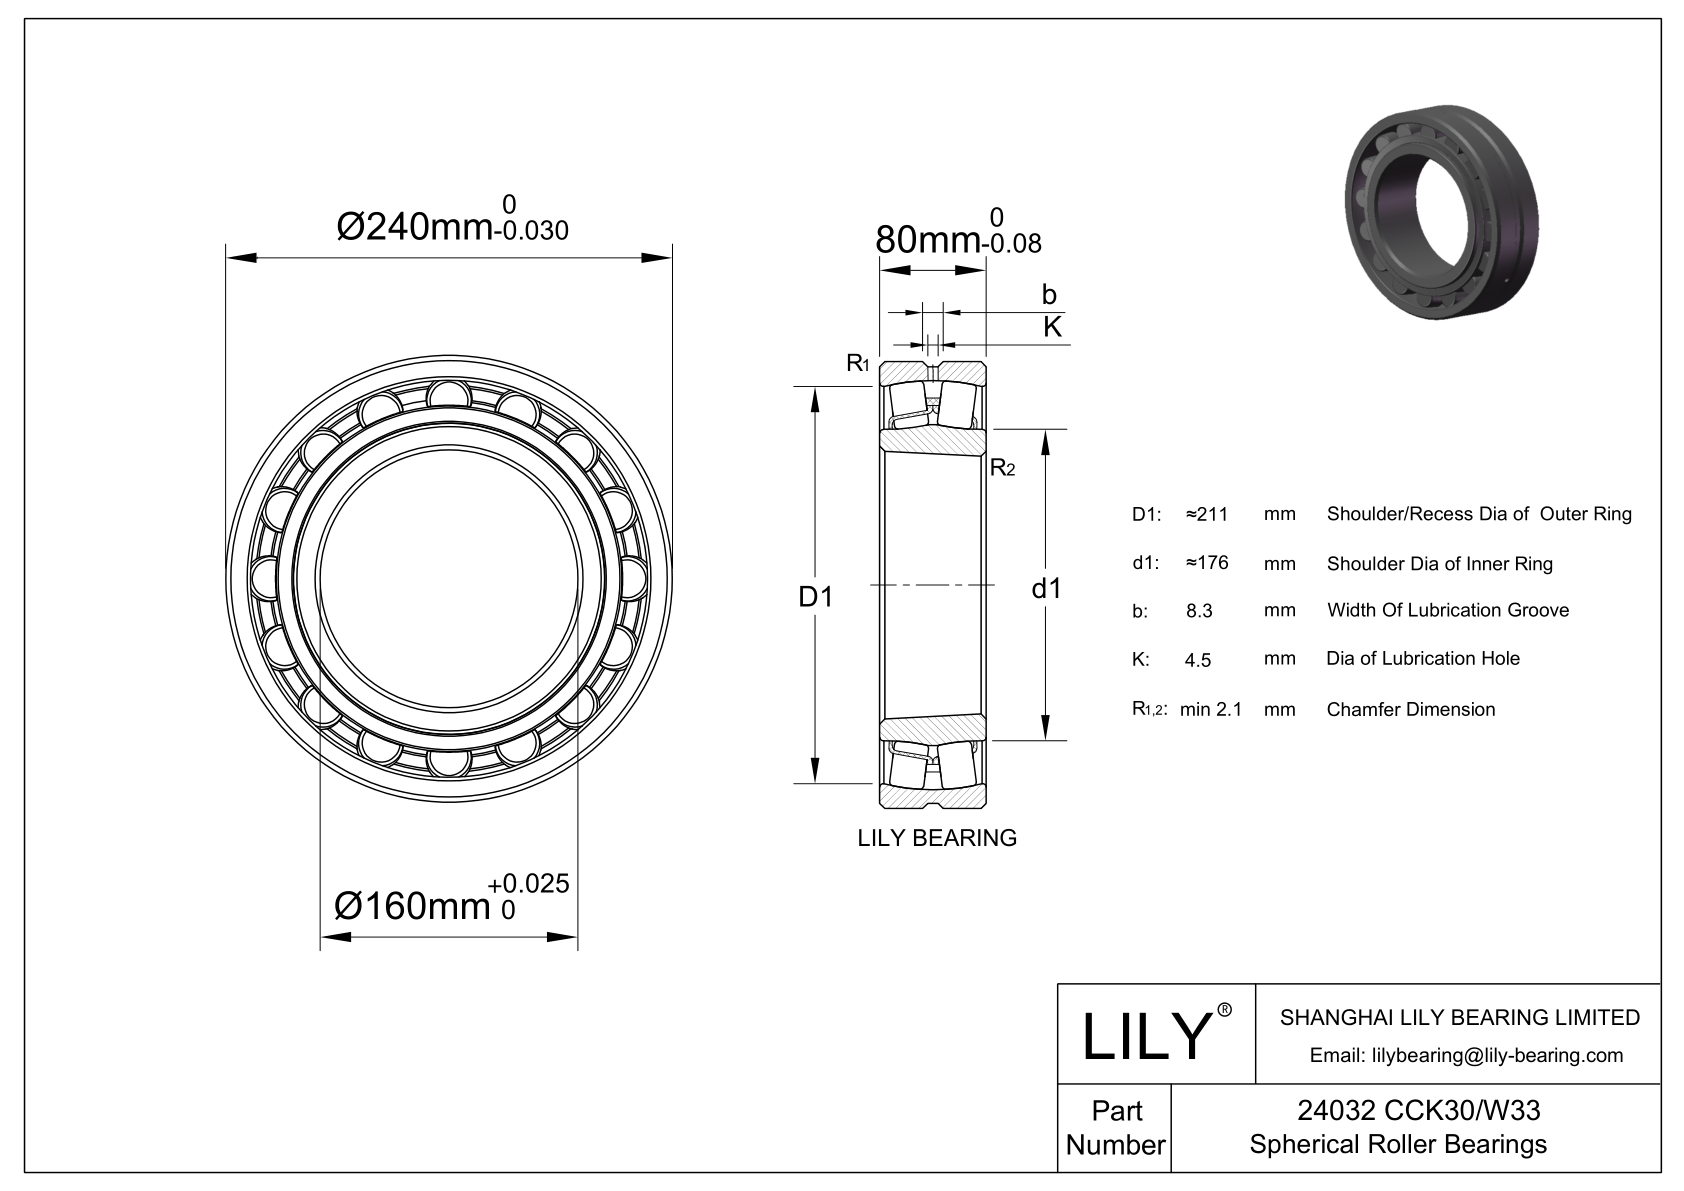 24032 CCK30/W33 Double Row Spherical Roller Bearing cad drawing